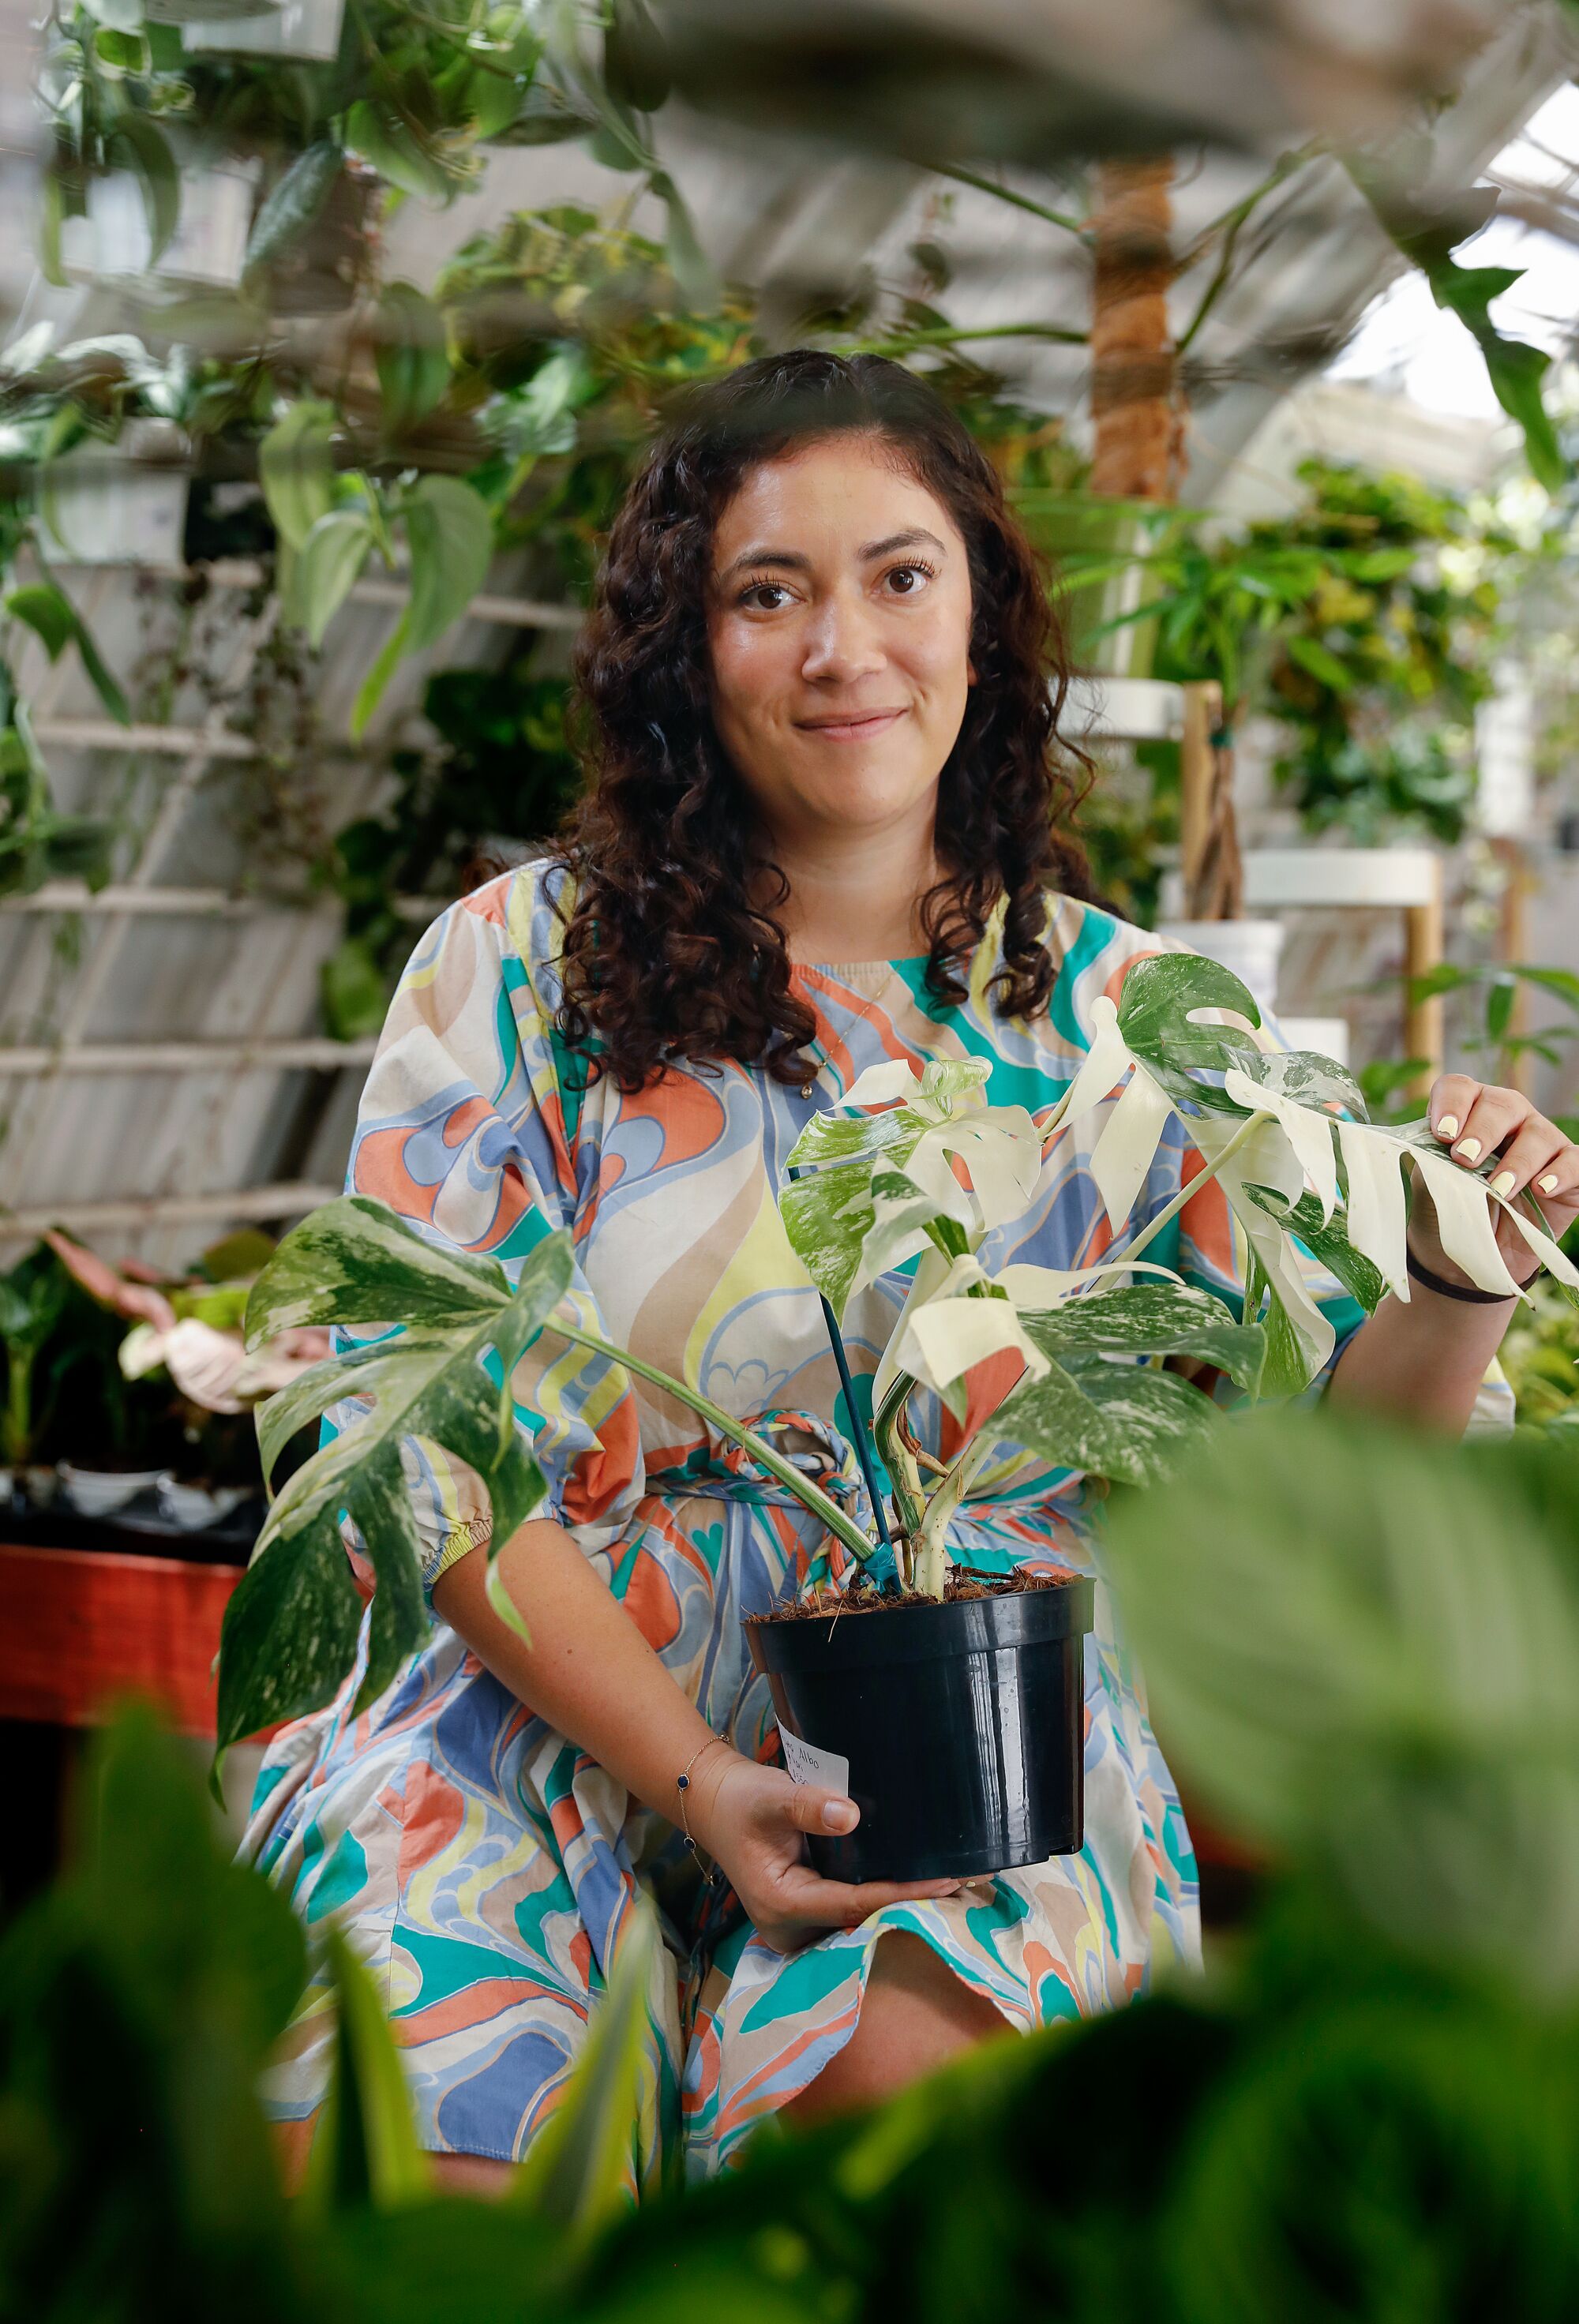 A woman standing among plants in a greenhouse-like space